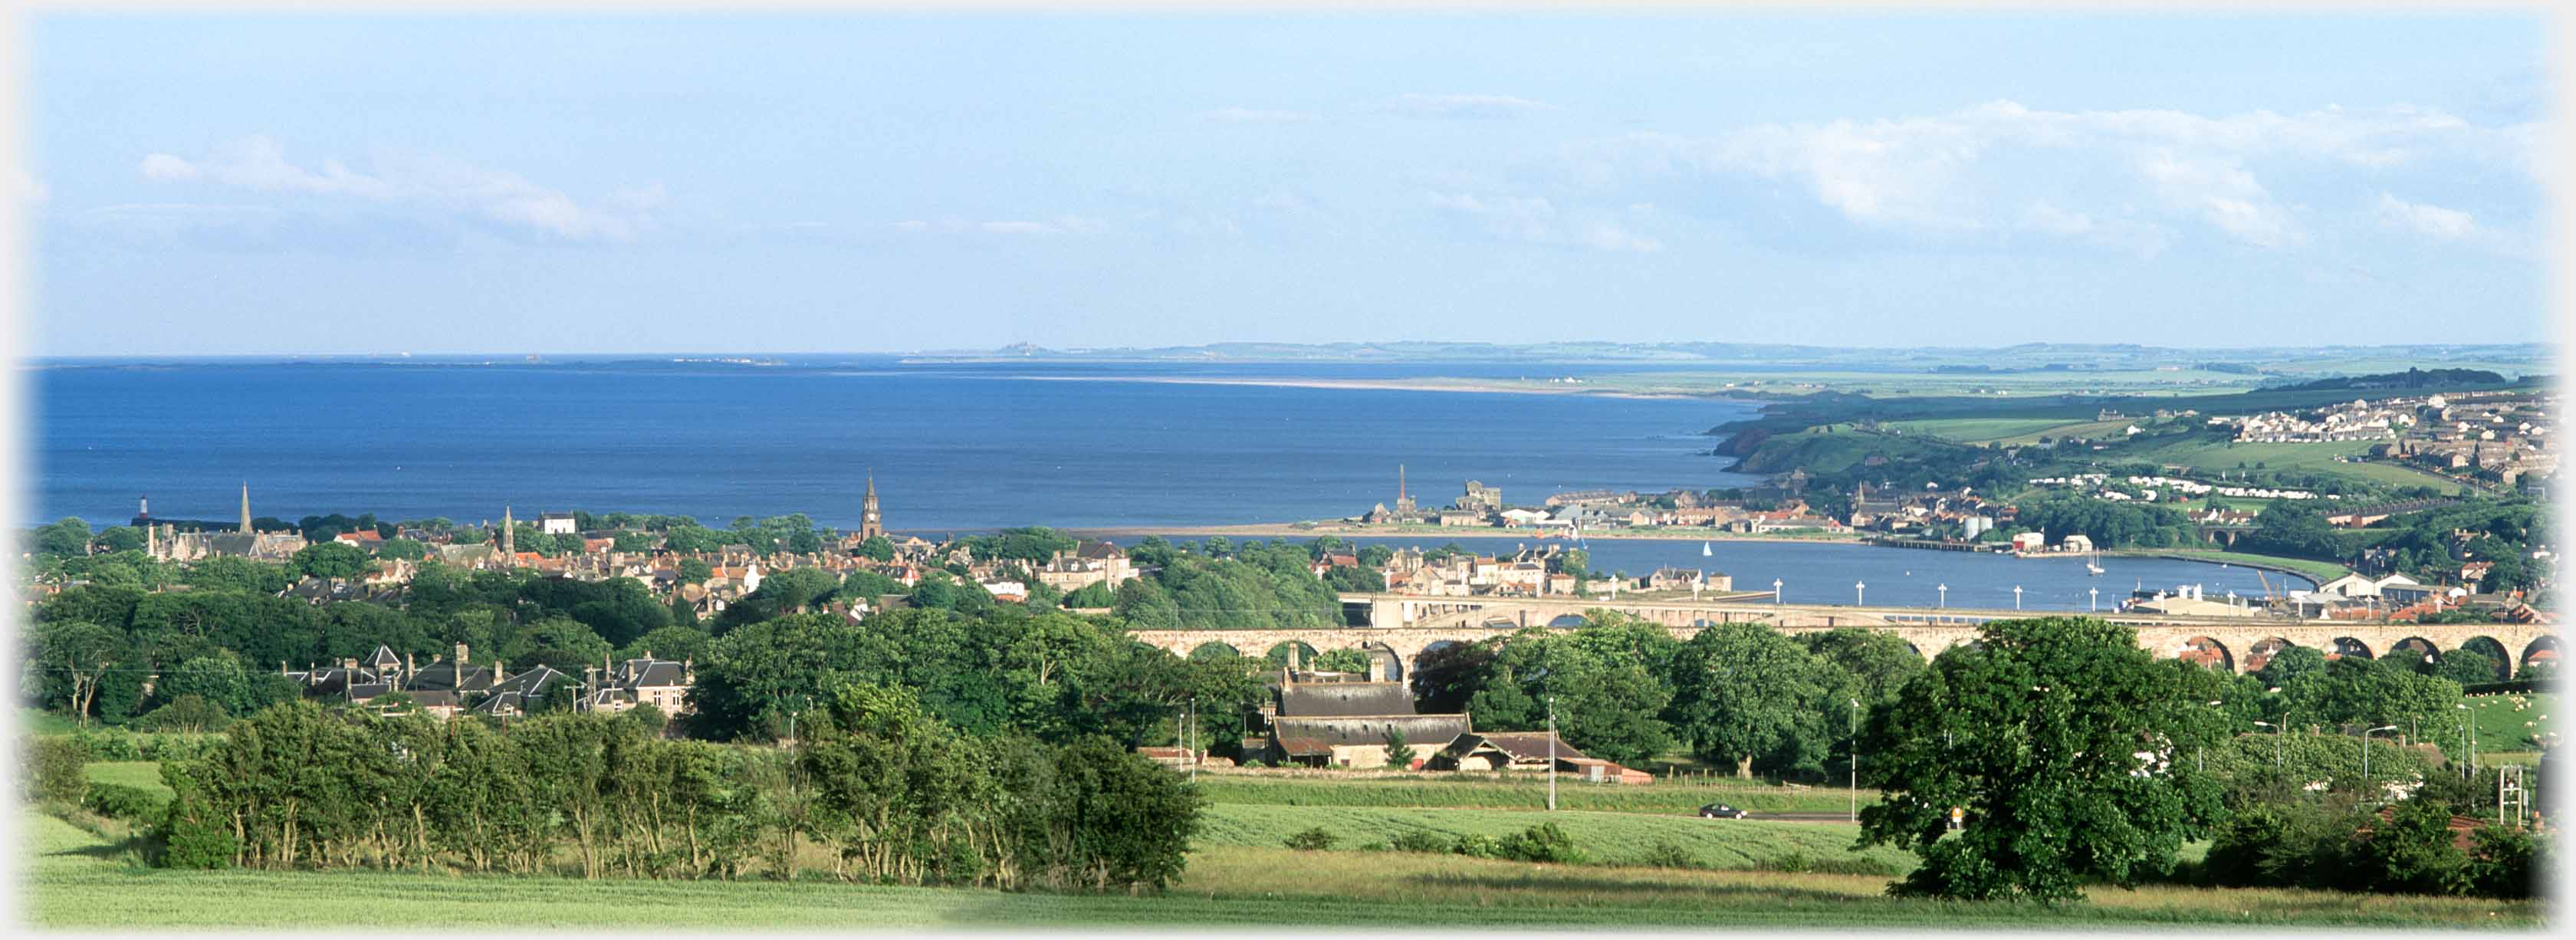 Panaramic view of Berwick on Tweed and Sittal with sea and distant Bamburgh Castle.